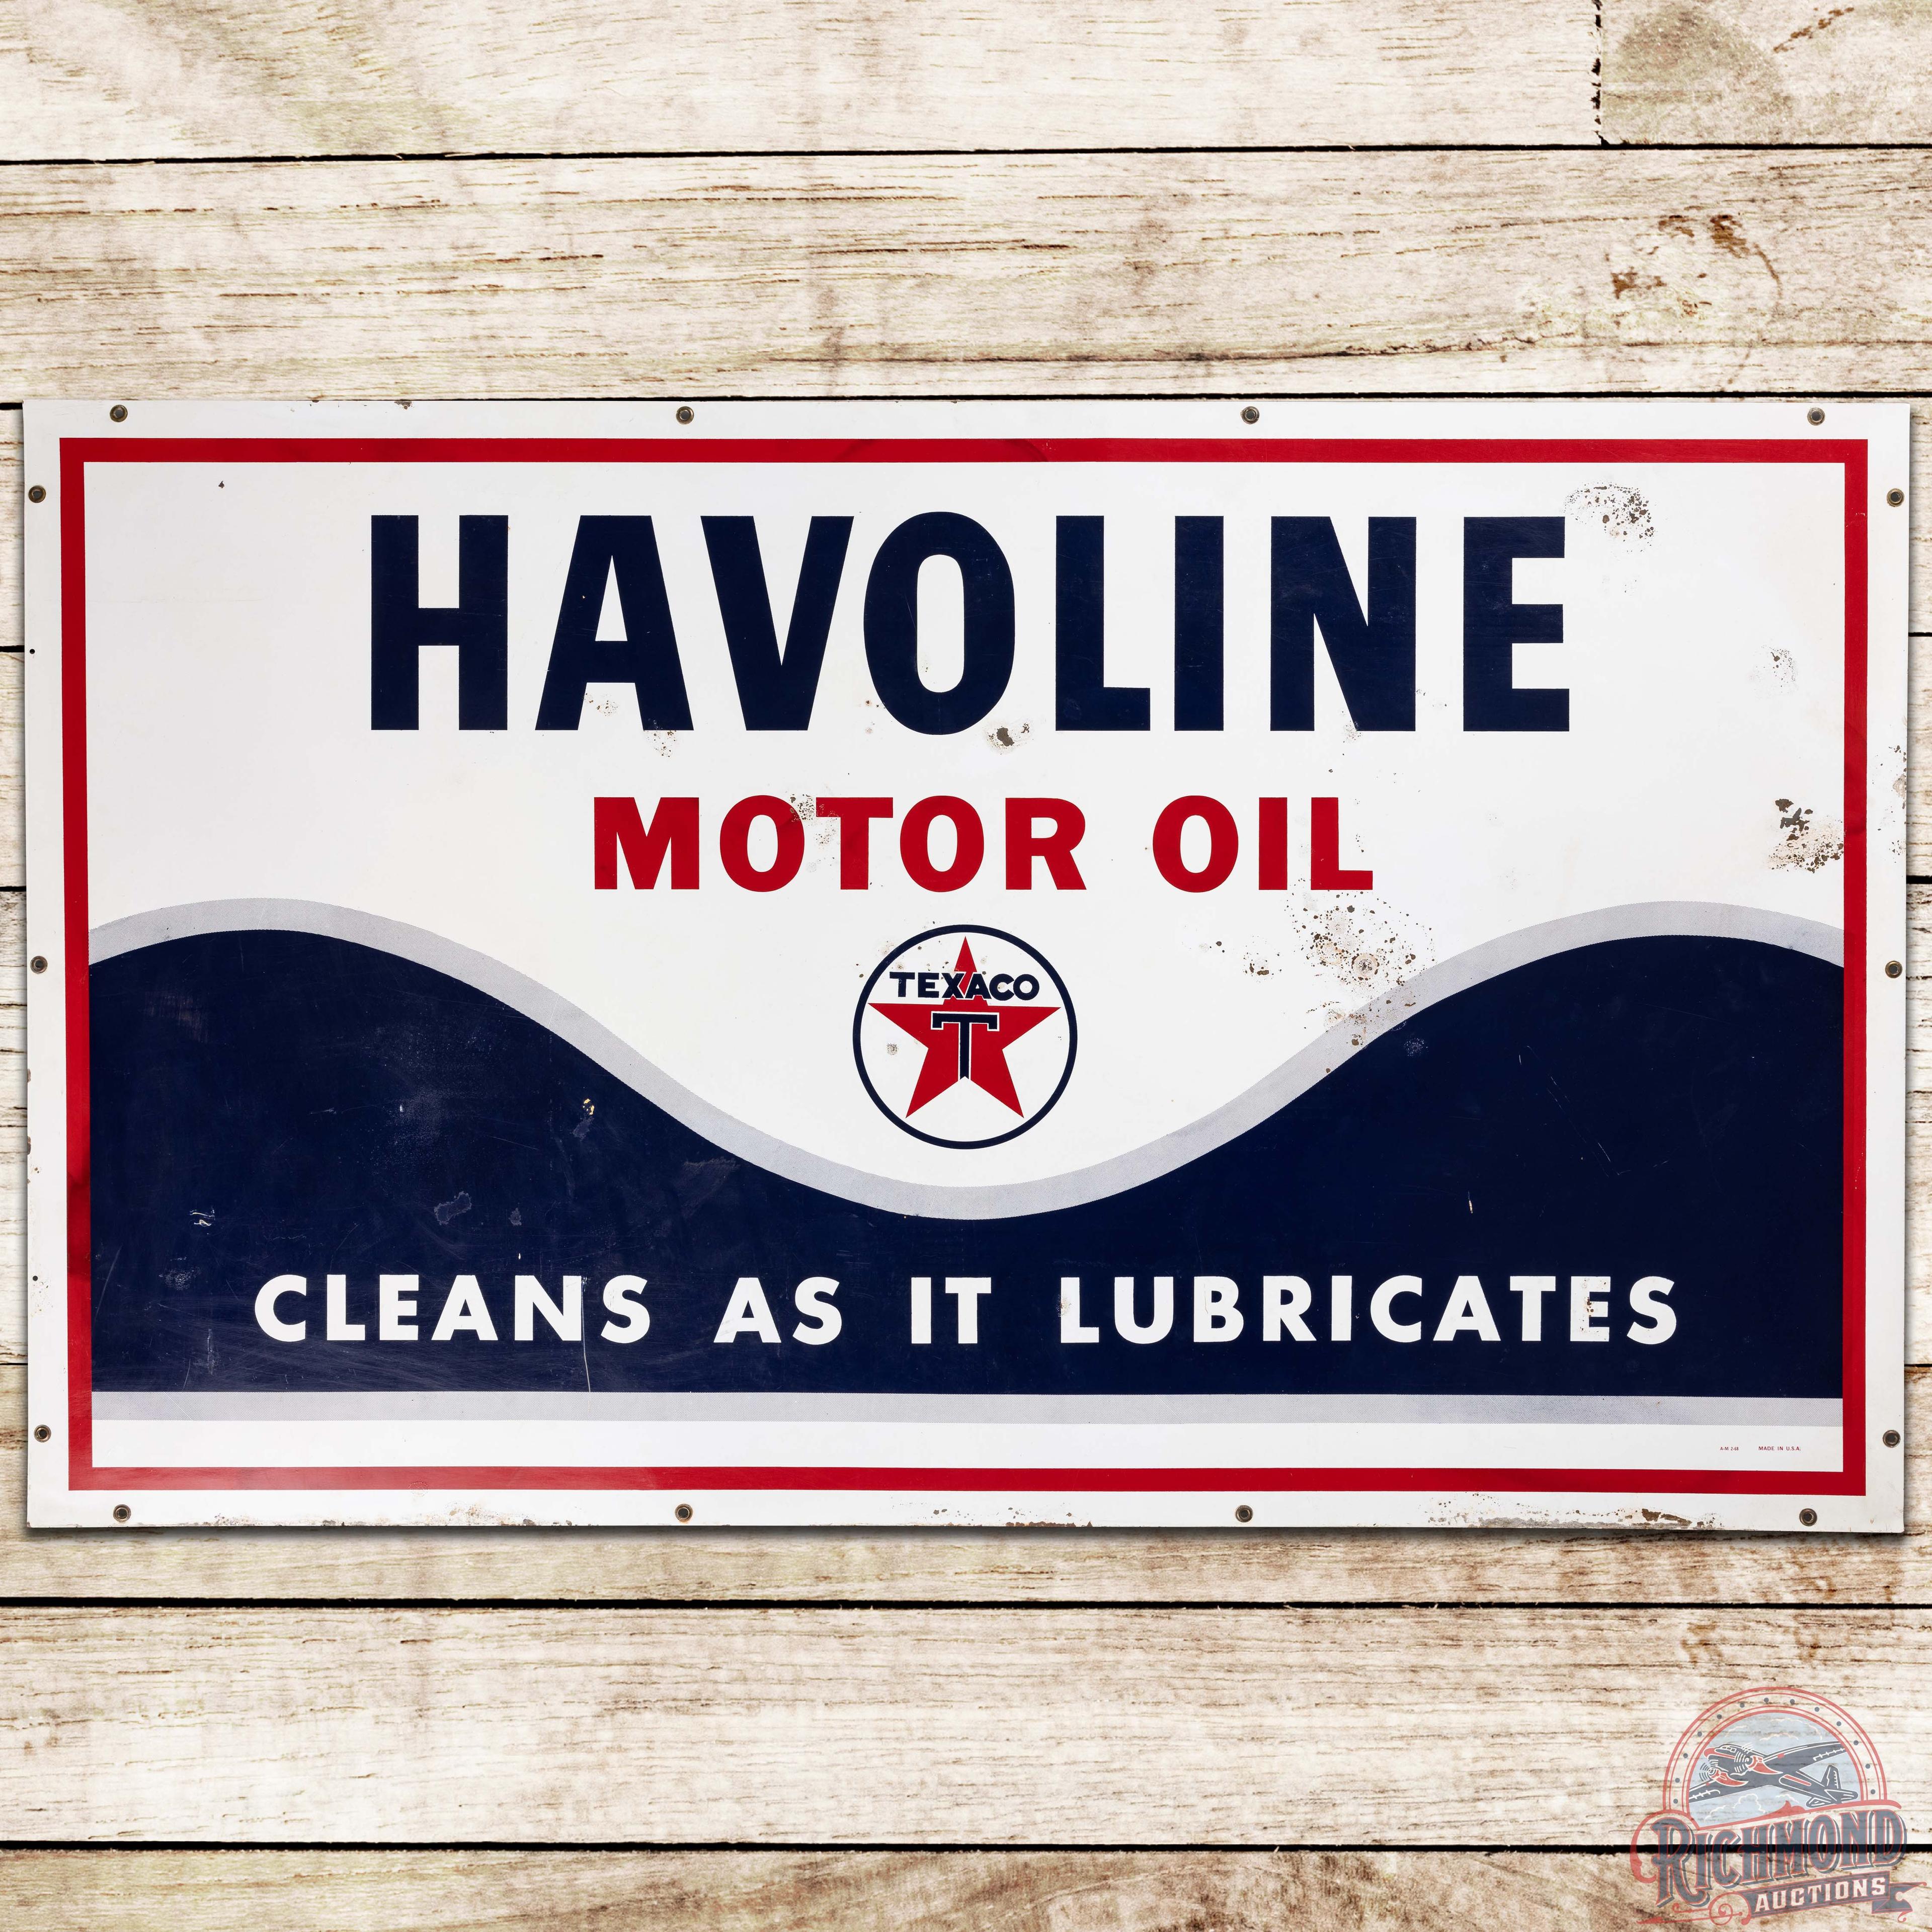 1968 Havoline Motor Oil "Cleans as it Lubricates" SS Tin Sign w/ Logo